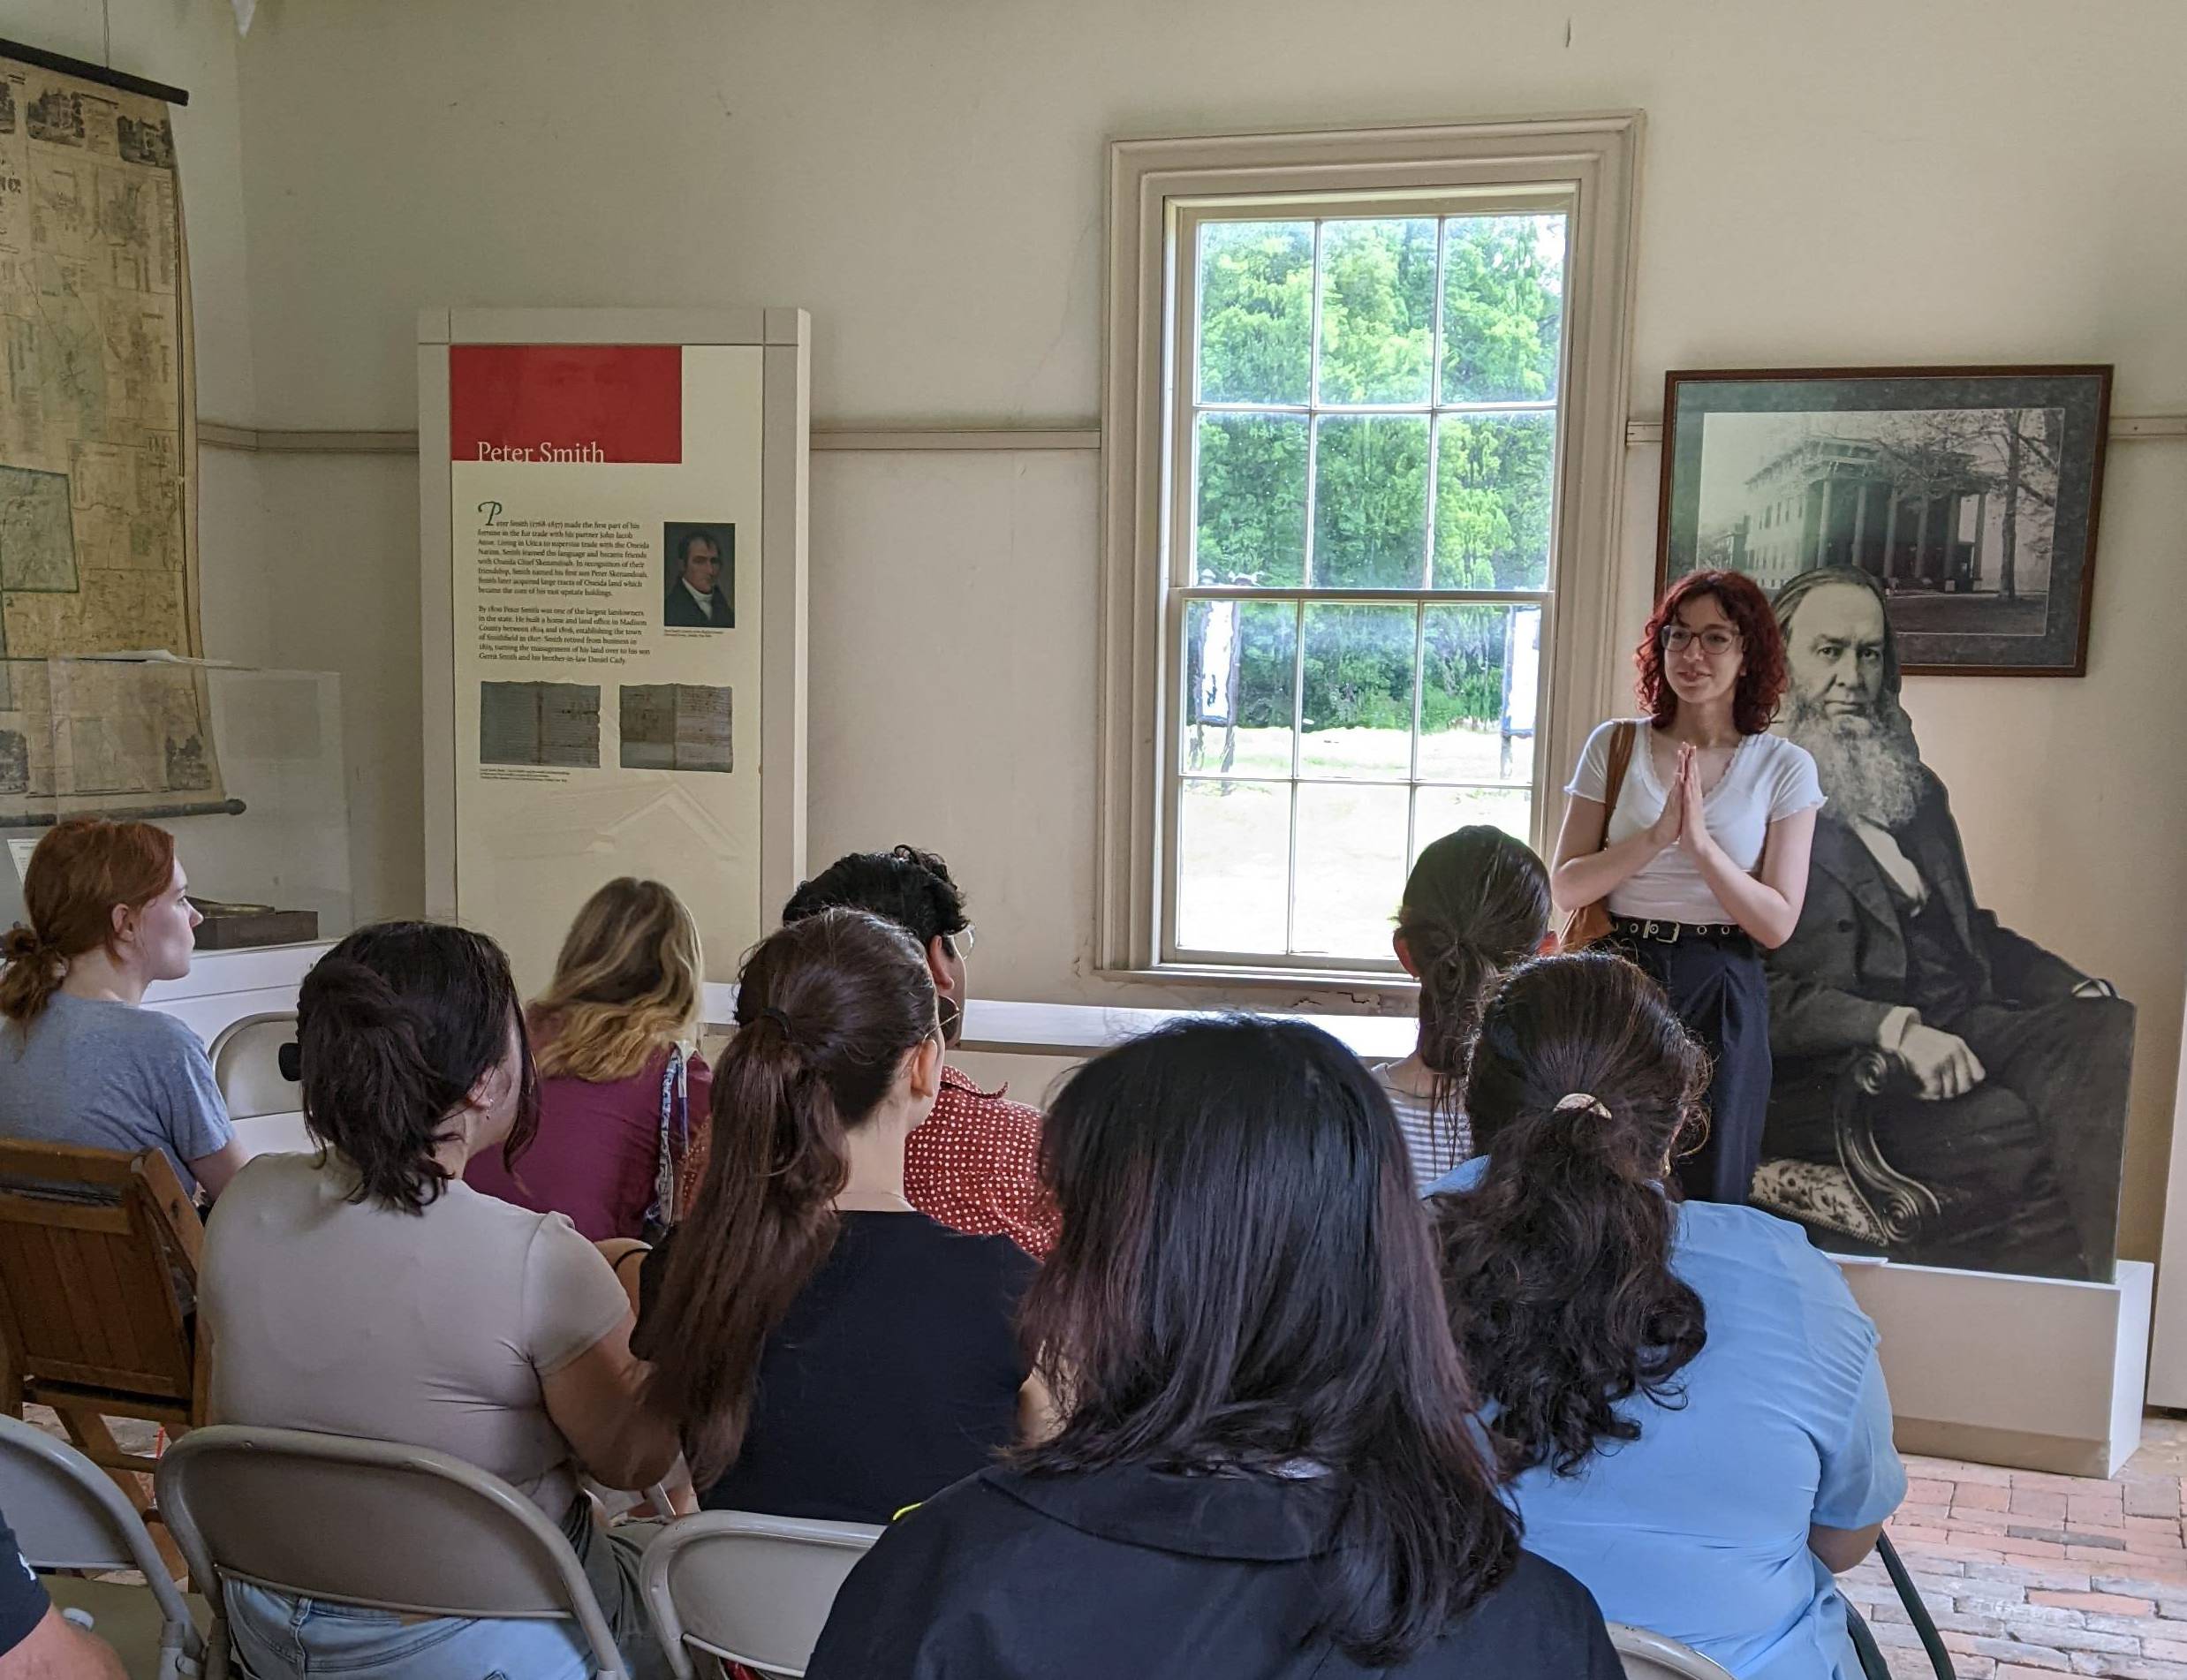 Rory Gold Wienk gives a presentation to students at the Gerrit Smith Estate